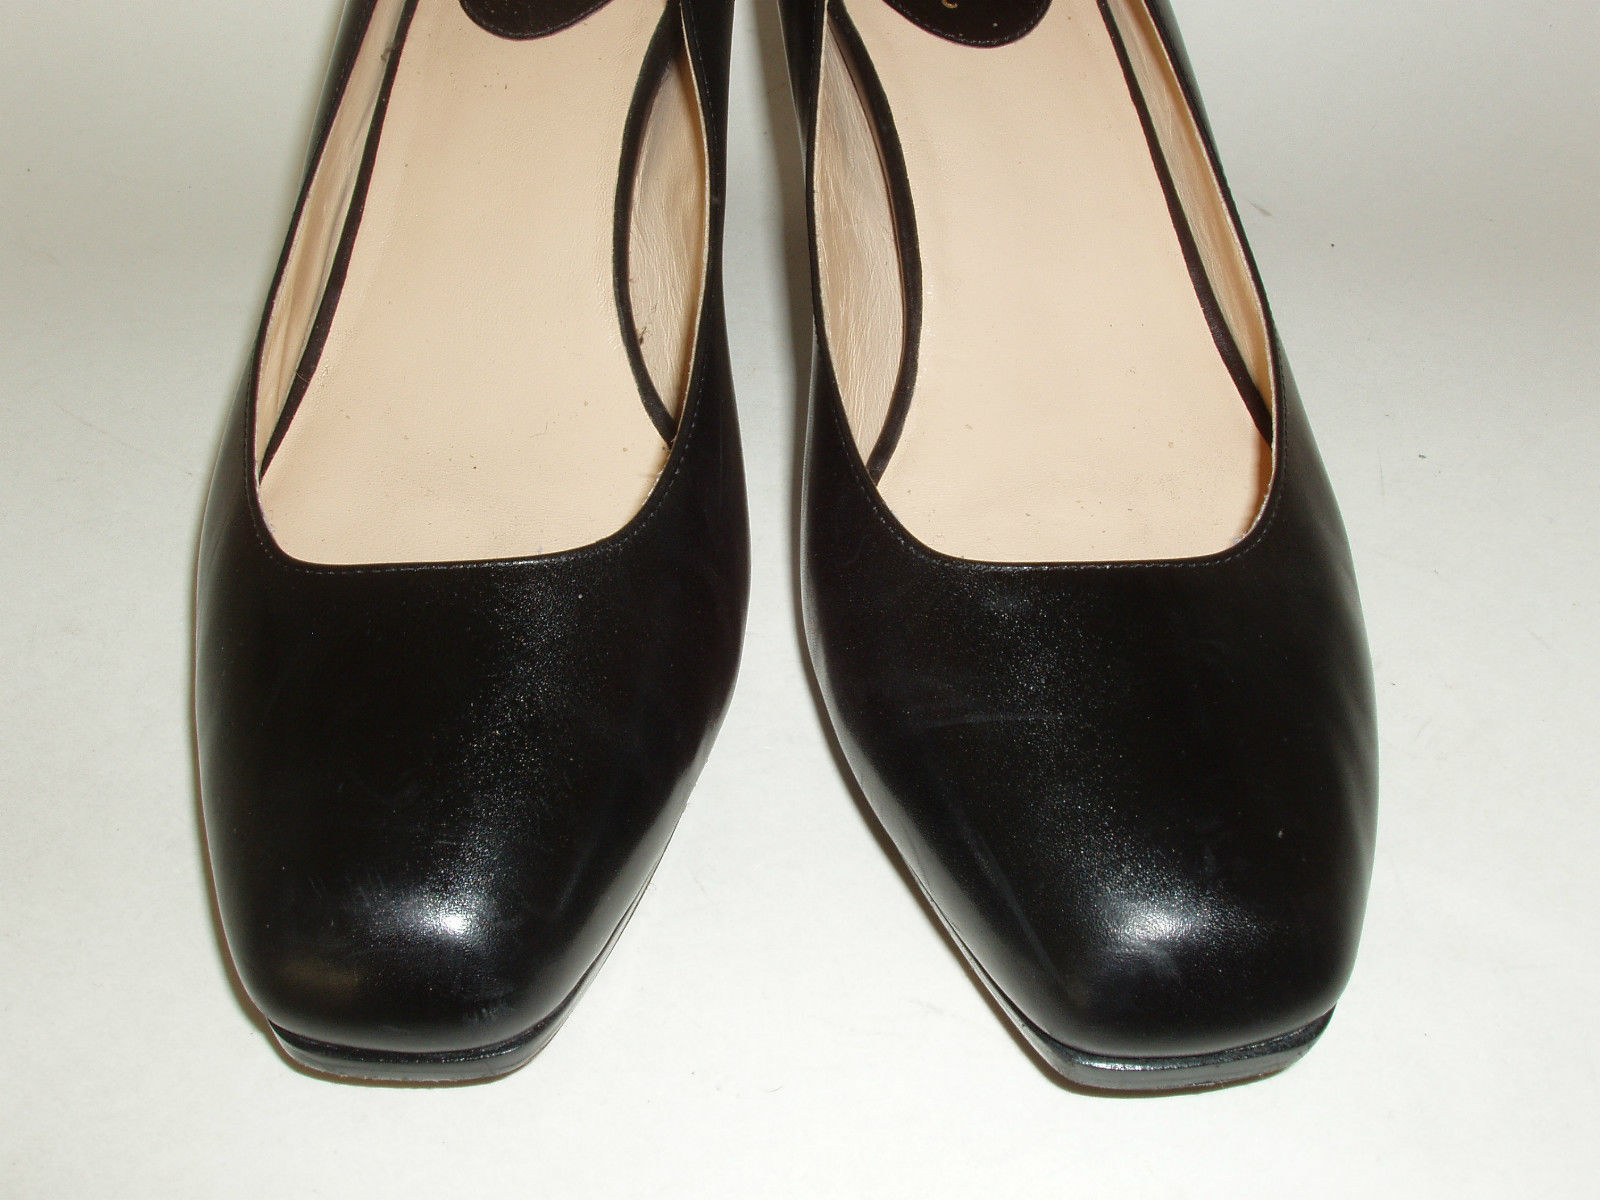 Cole Haan Nike Air Cushion Insole Black Leather Low Platform Pumps ...